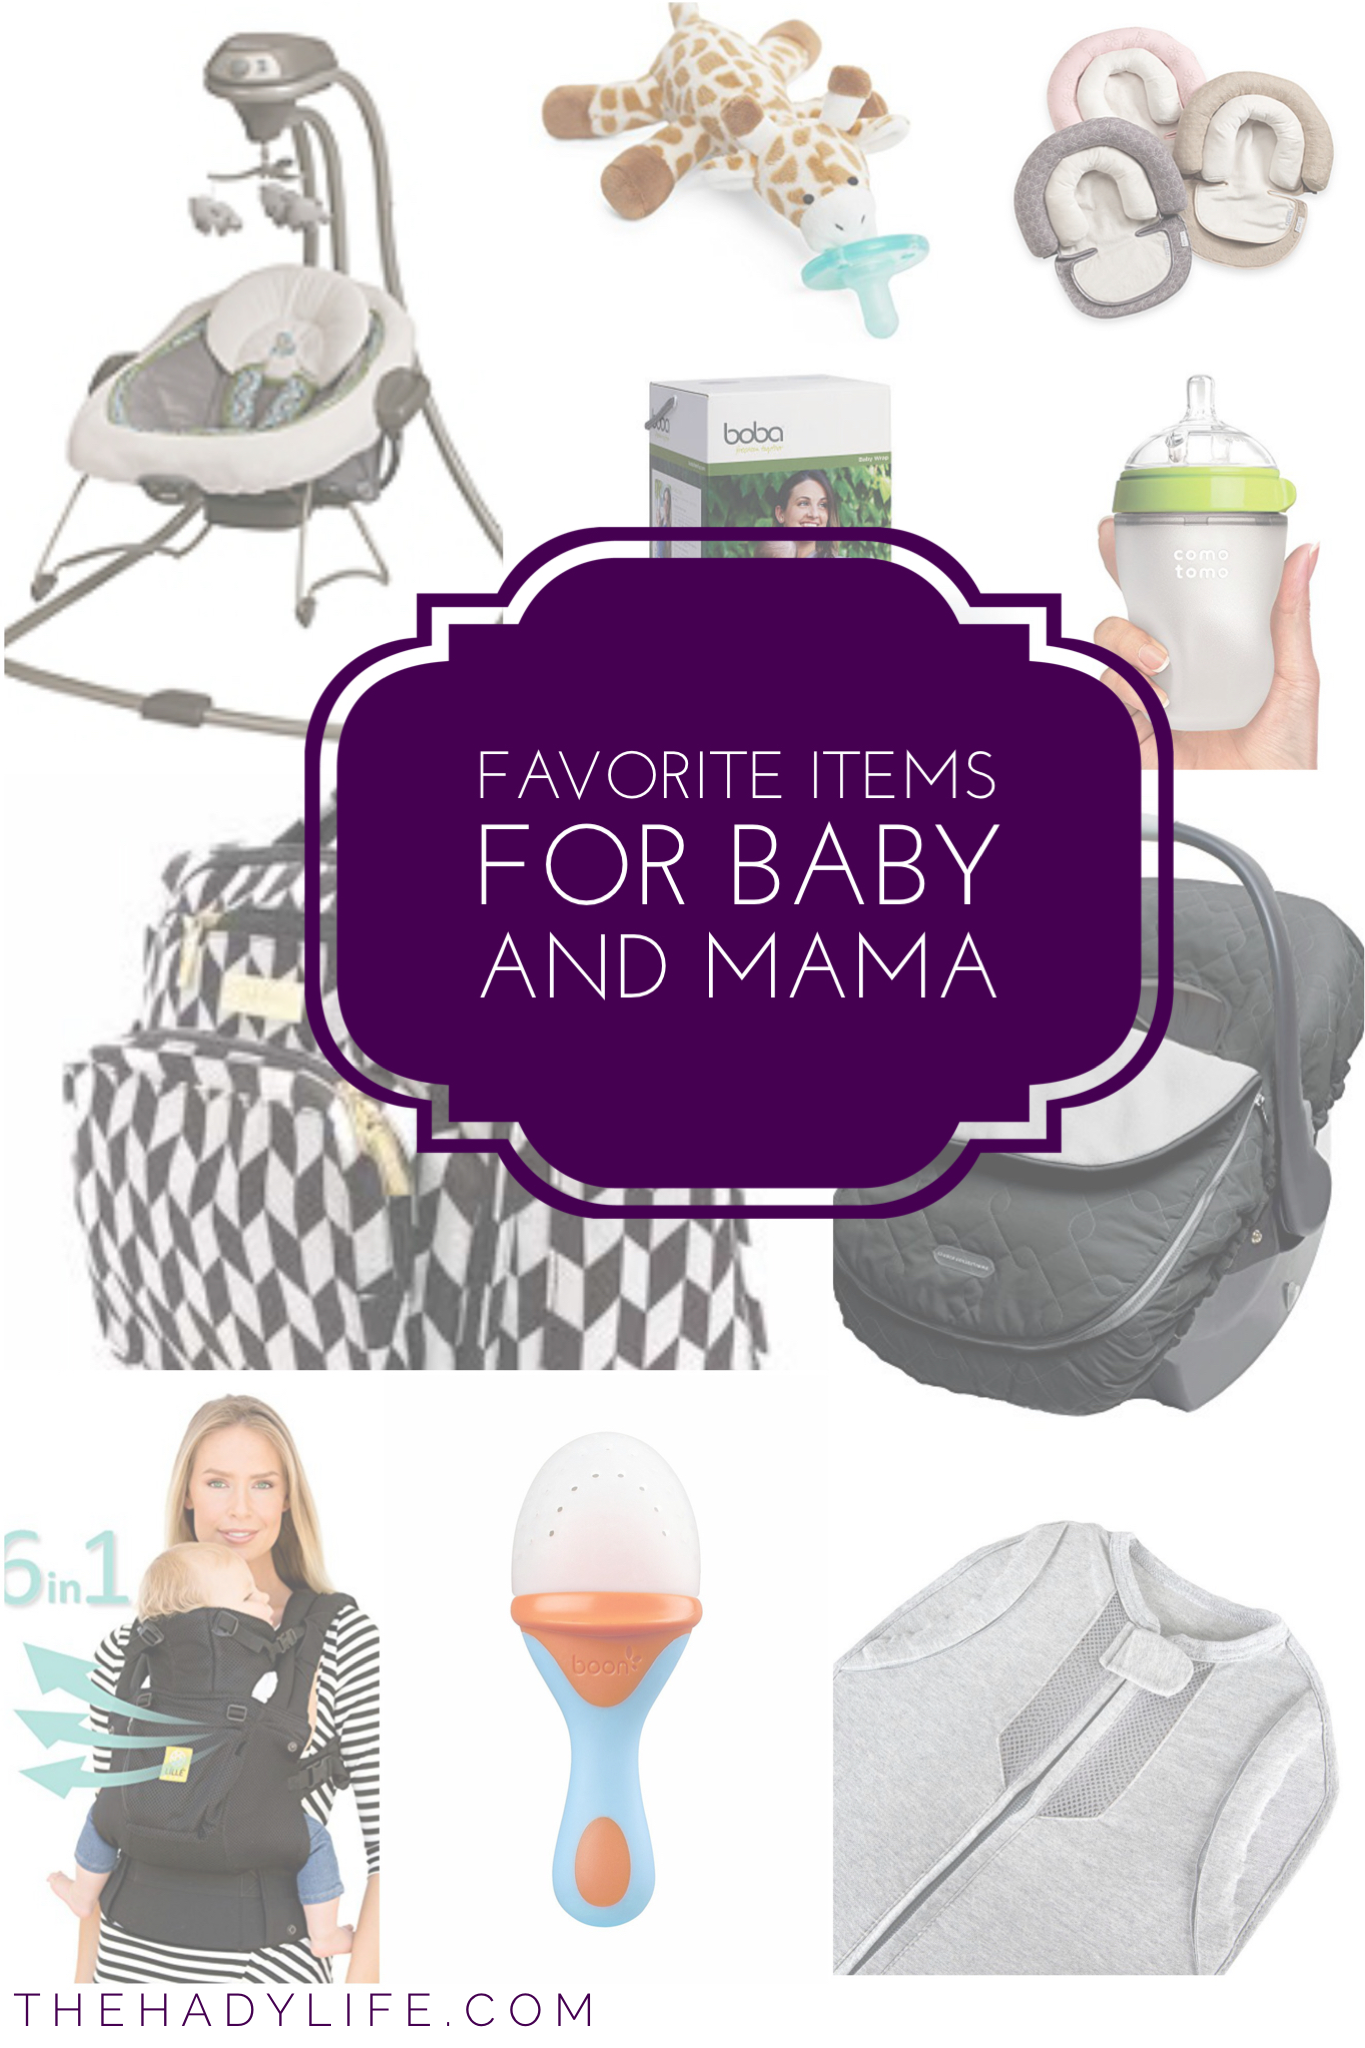 Favorite Items for Baby and Mama